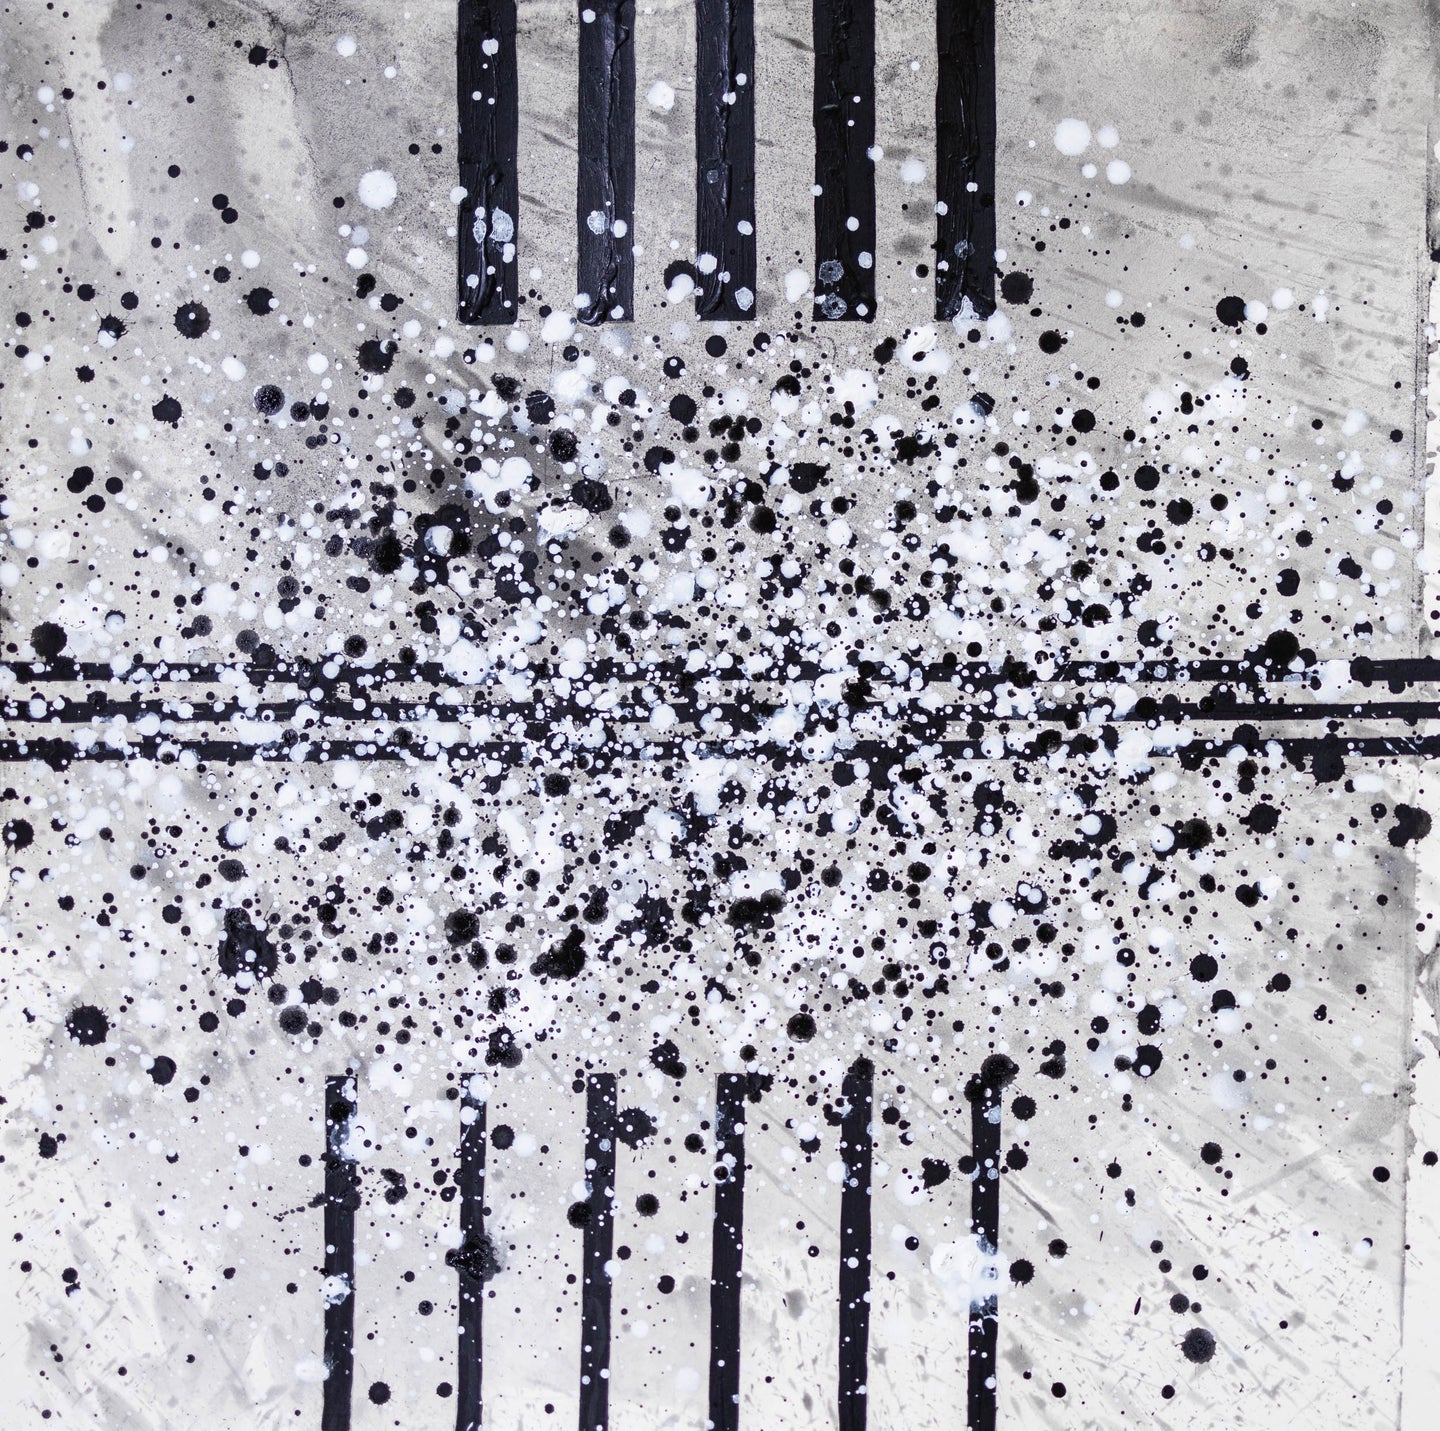 J. Steven Manolis, South Pointe Park (Black & White) 8, 2021, watercolor, acrylic and latex enamel on paper, 18 x 18 inches, black and white abstract art